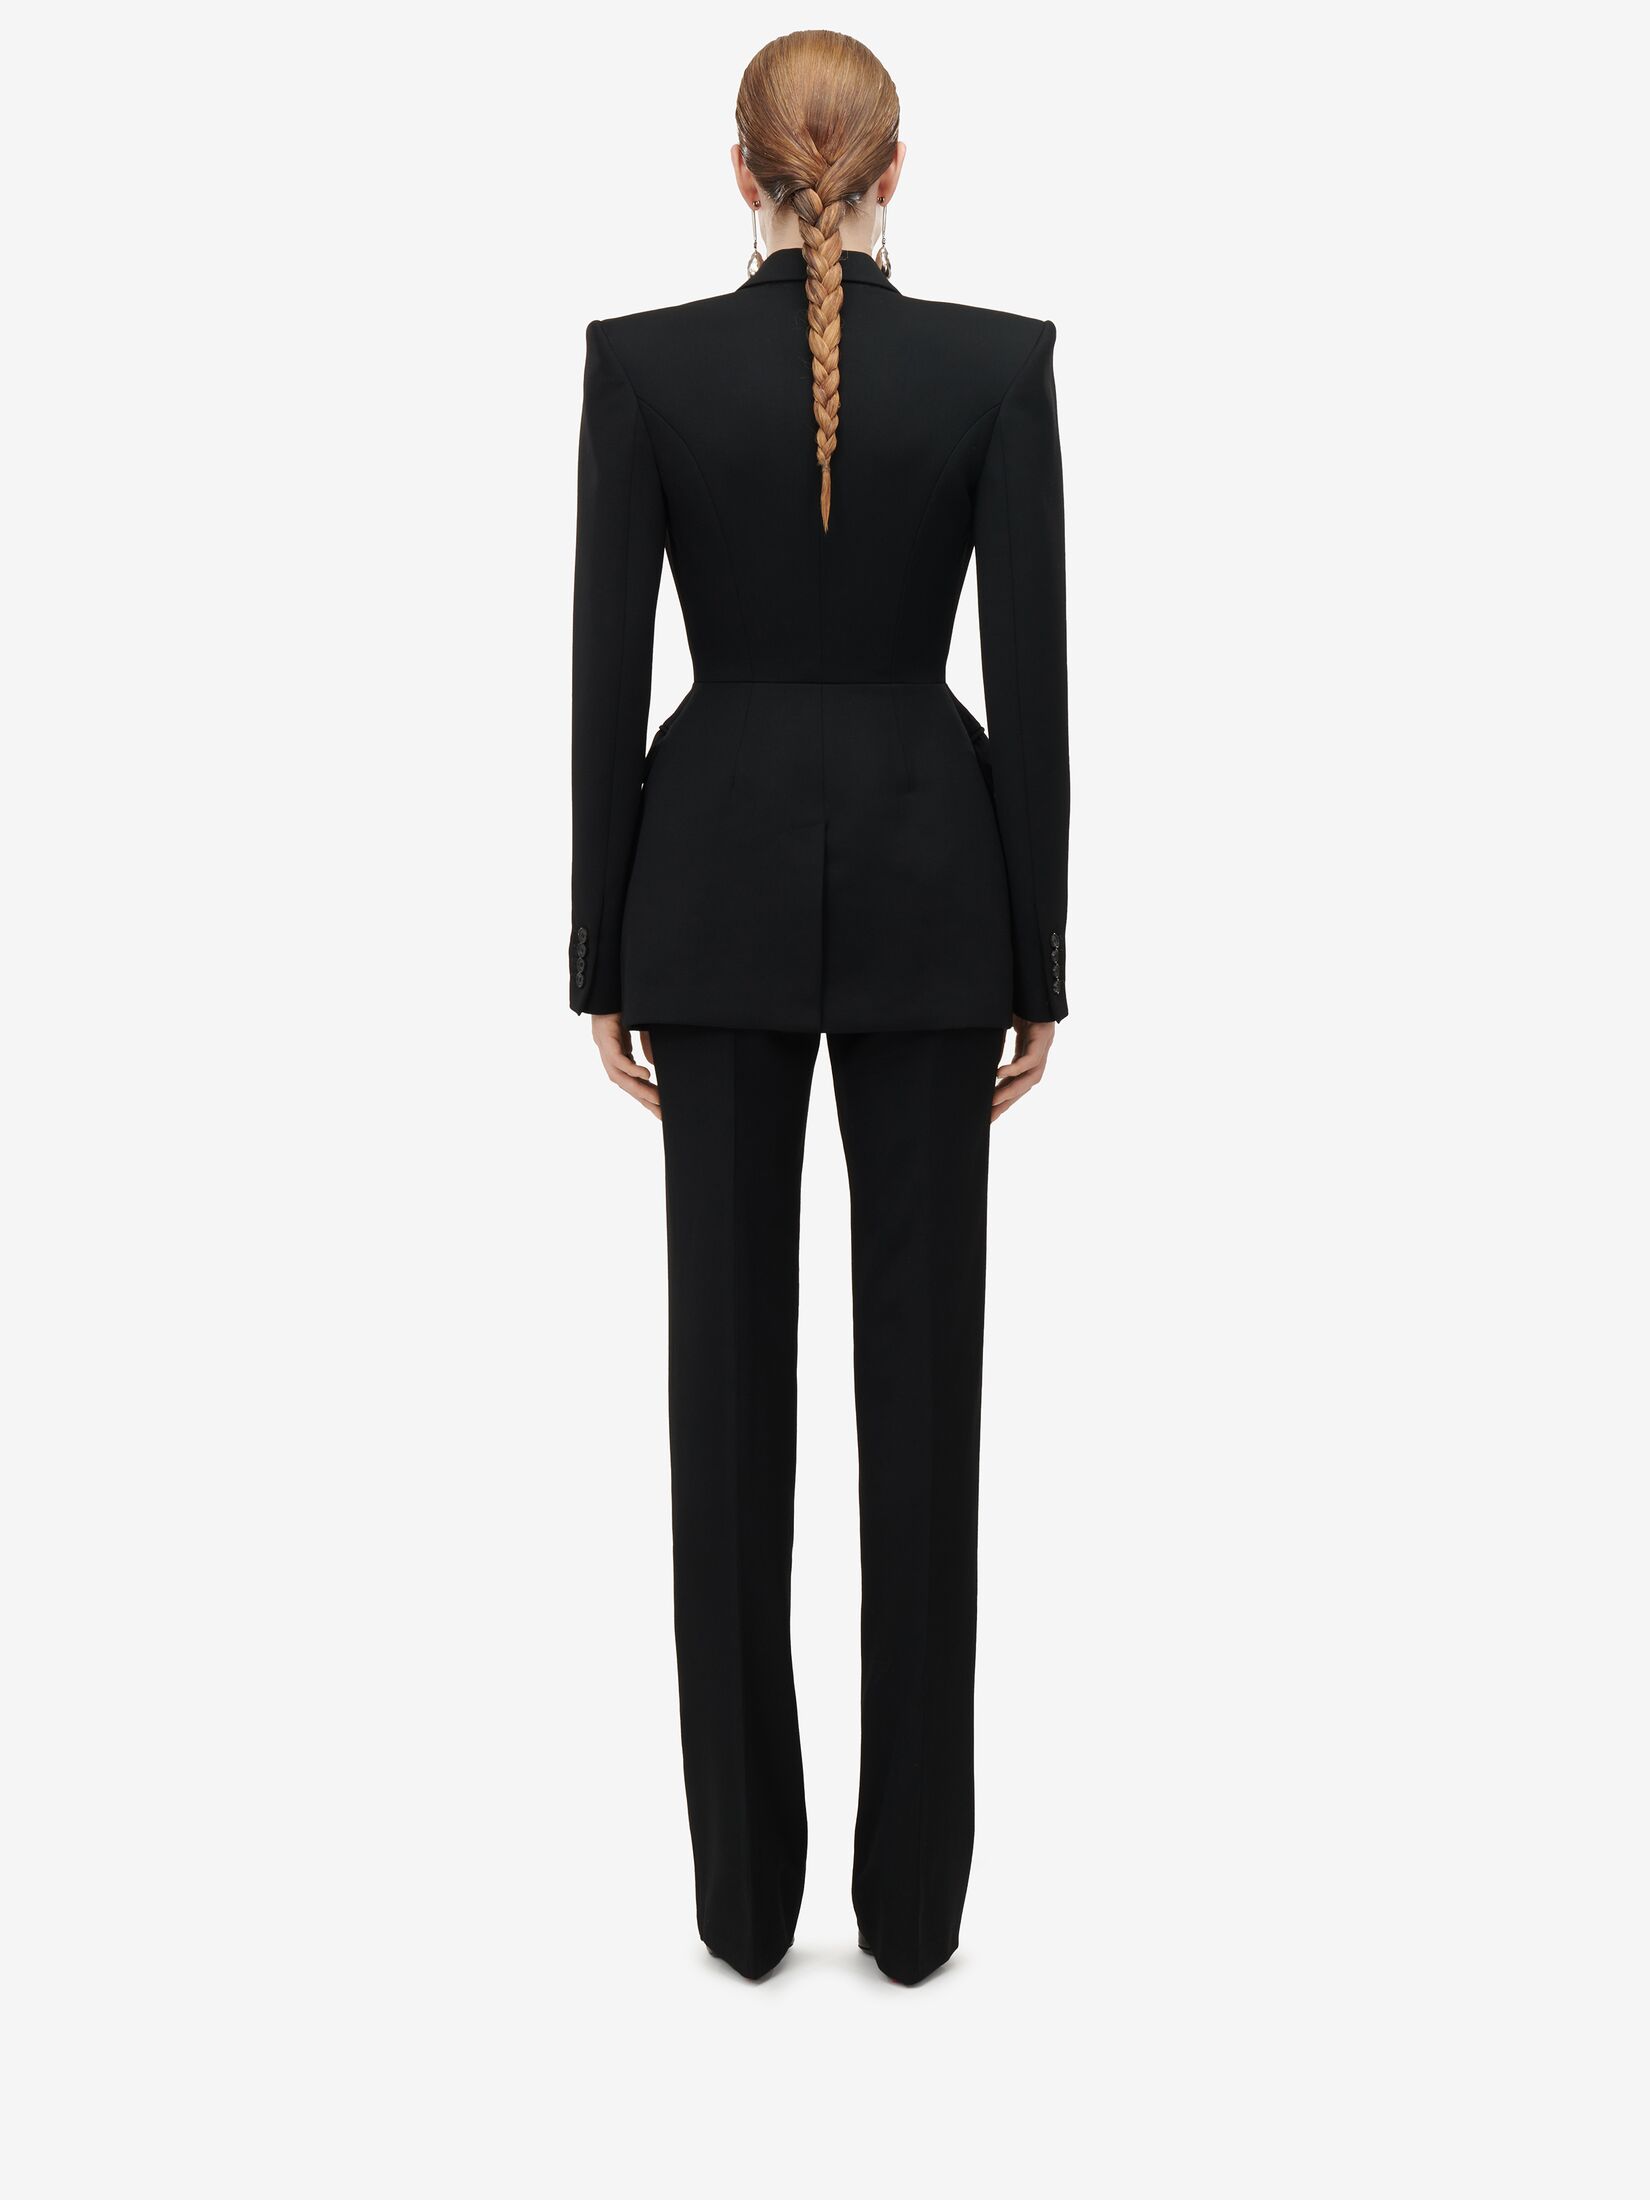 Y2k Alexander Mcqueen Tailored Trousers. Size 40 29 Waist. Straight Cut,  Black, Mid Rise. 